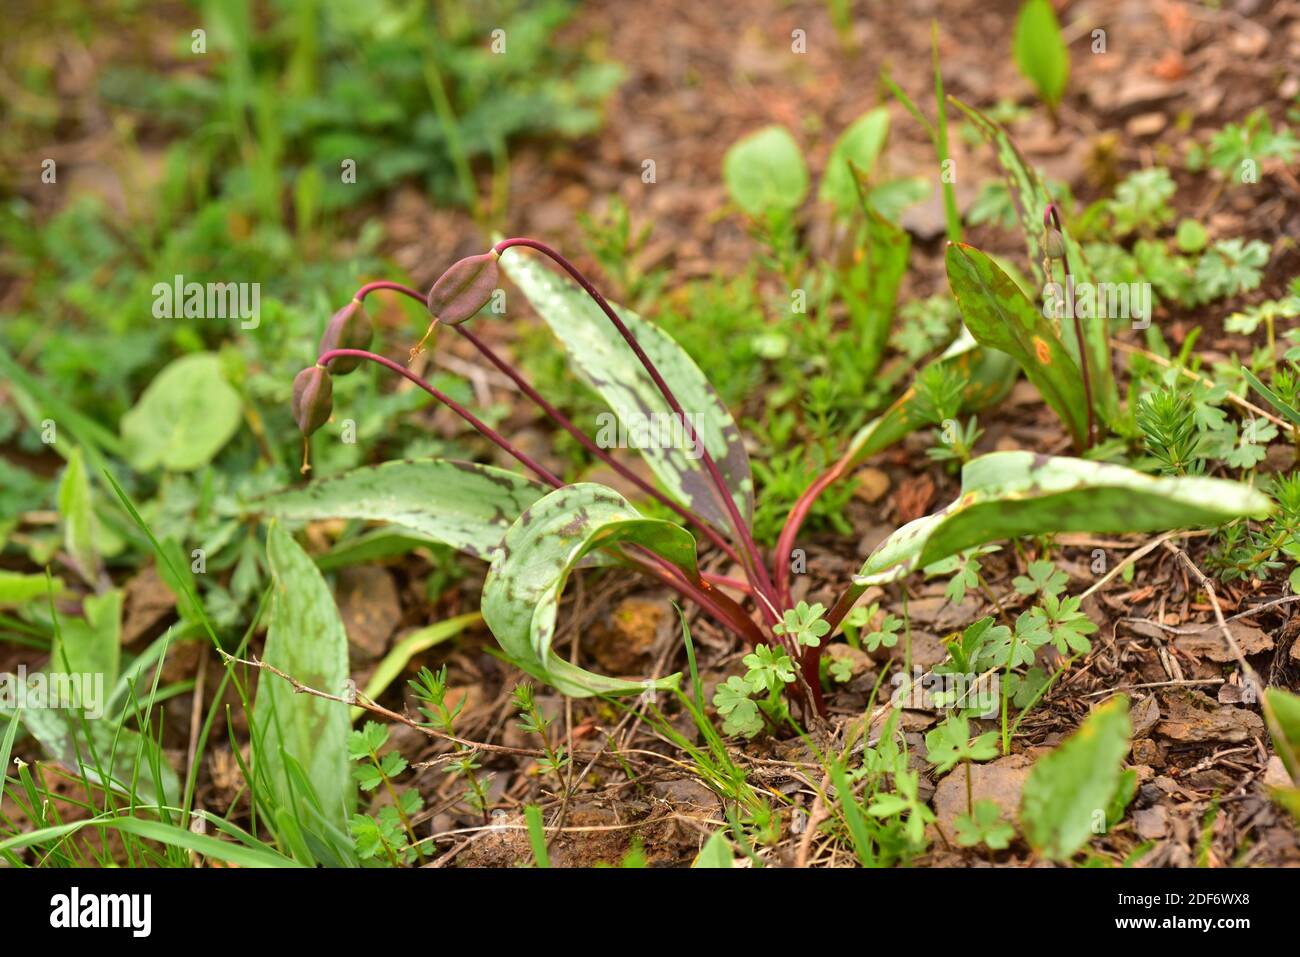 Dogtooth violet (Erythronium dens-canis) is a bulbous perennial herb native to central Europe and southern Europe mountains. Fruit detail. This photo Stock Photo